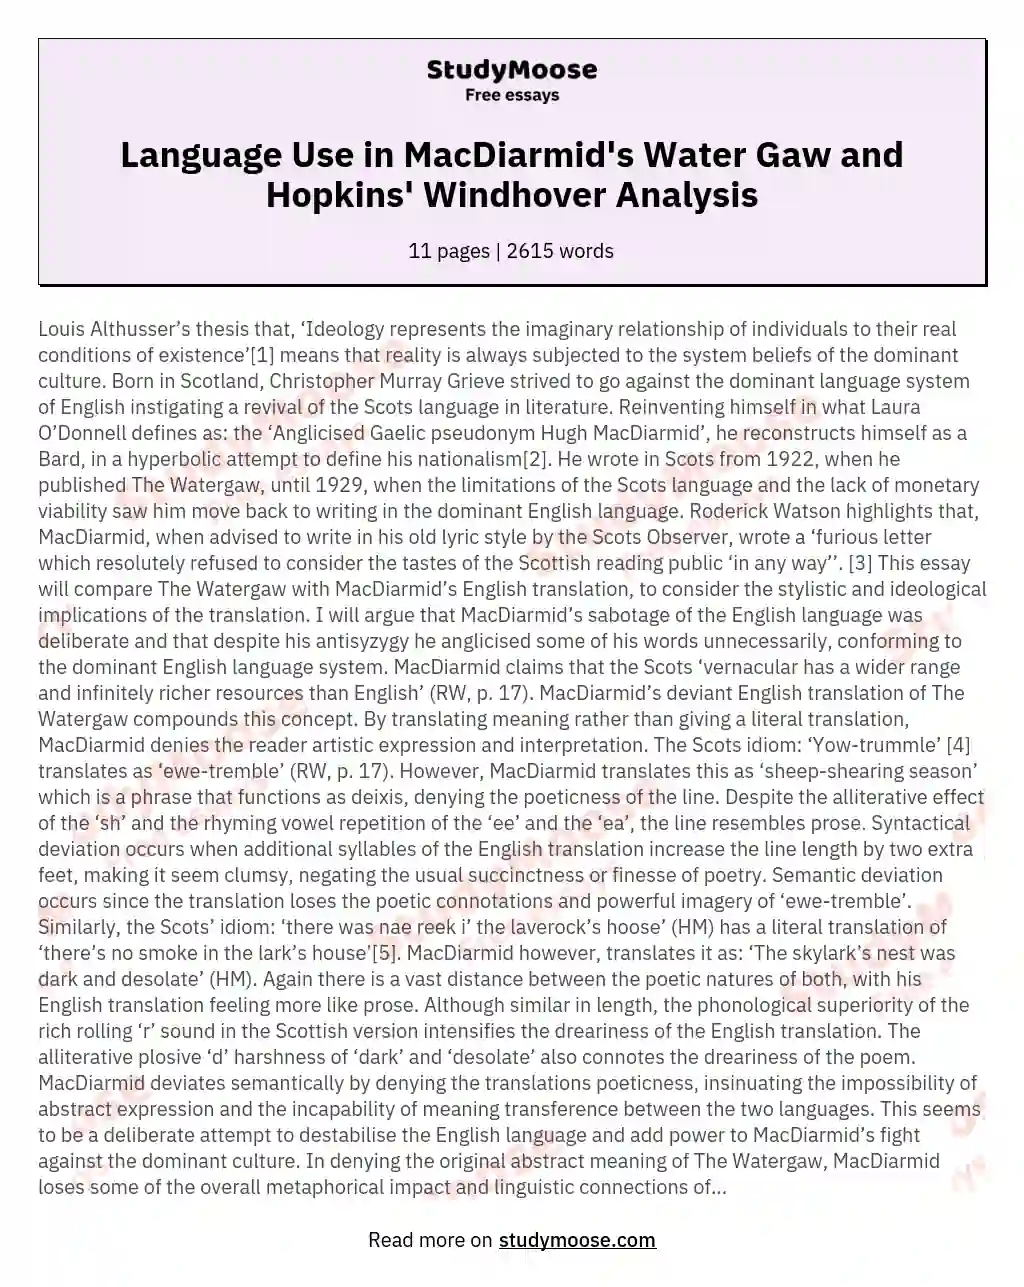 Language Use in MacDiarmid's Water Gaw and Hopkins' Windhover Analysis essay